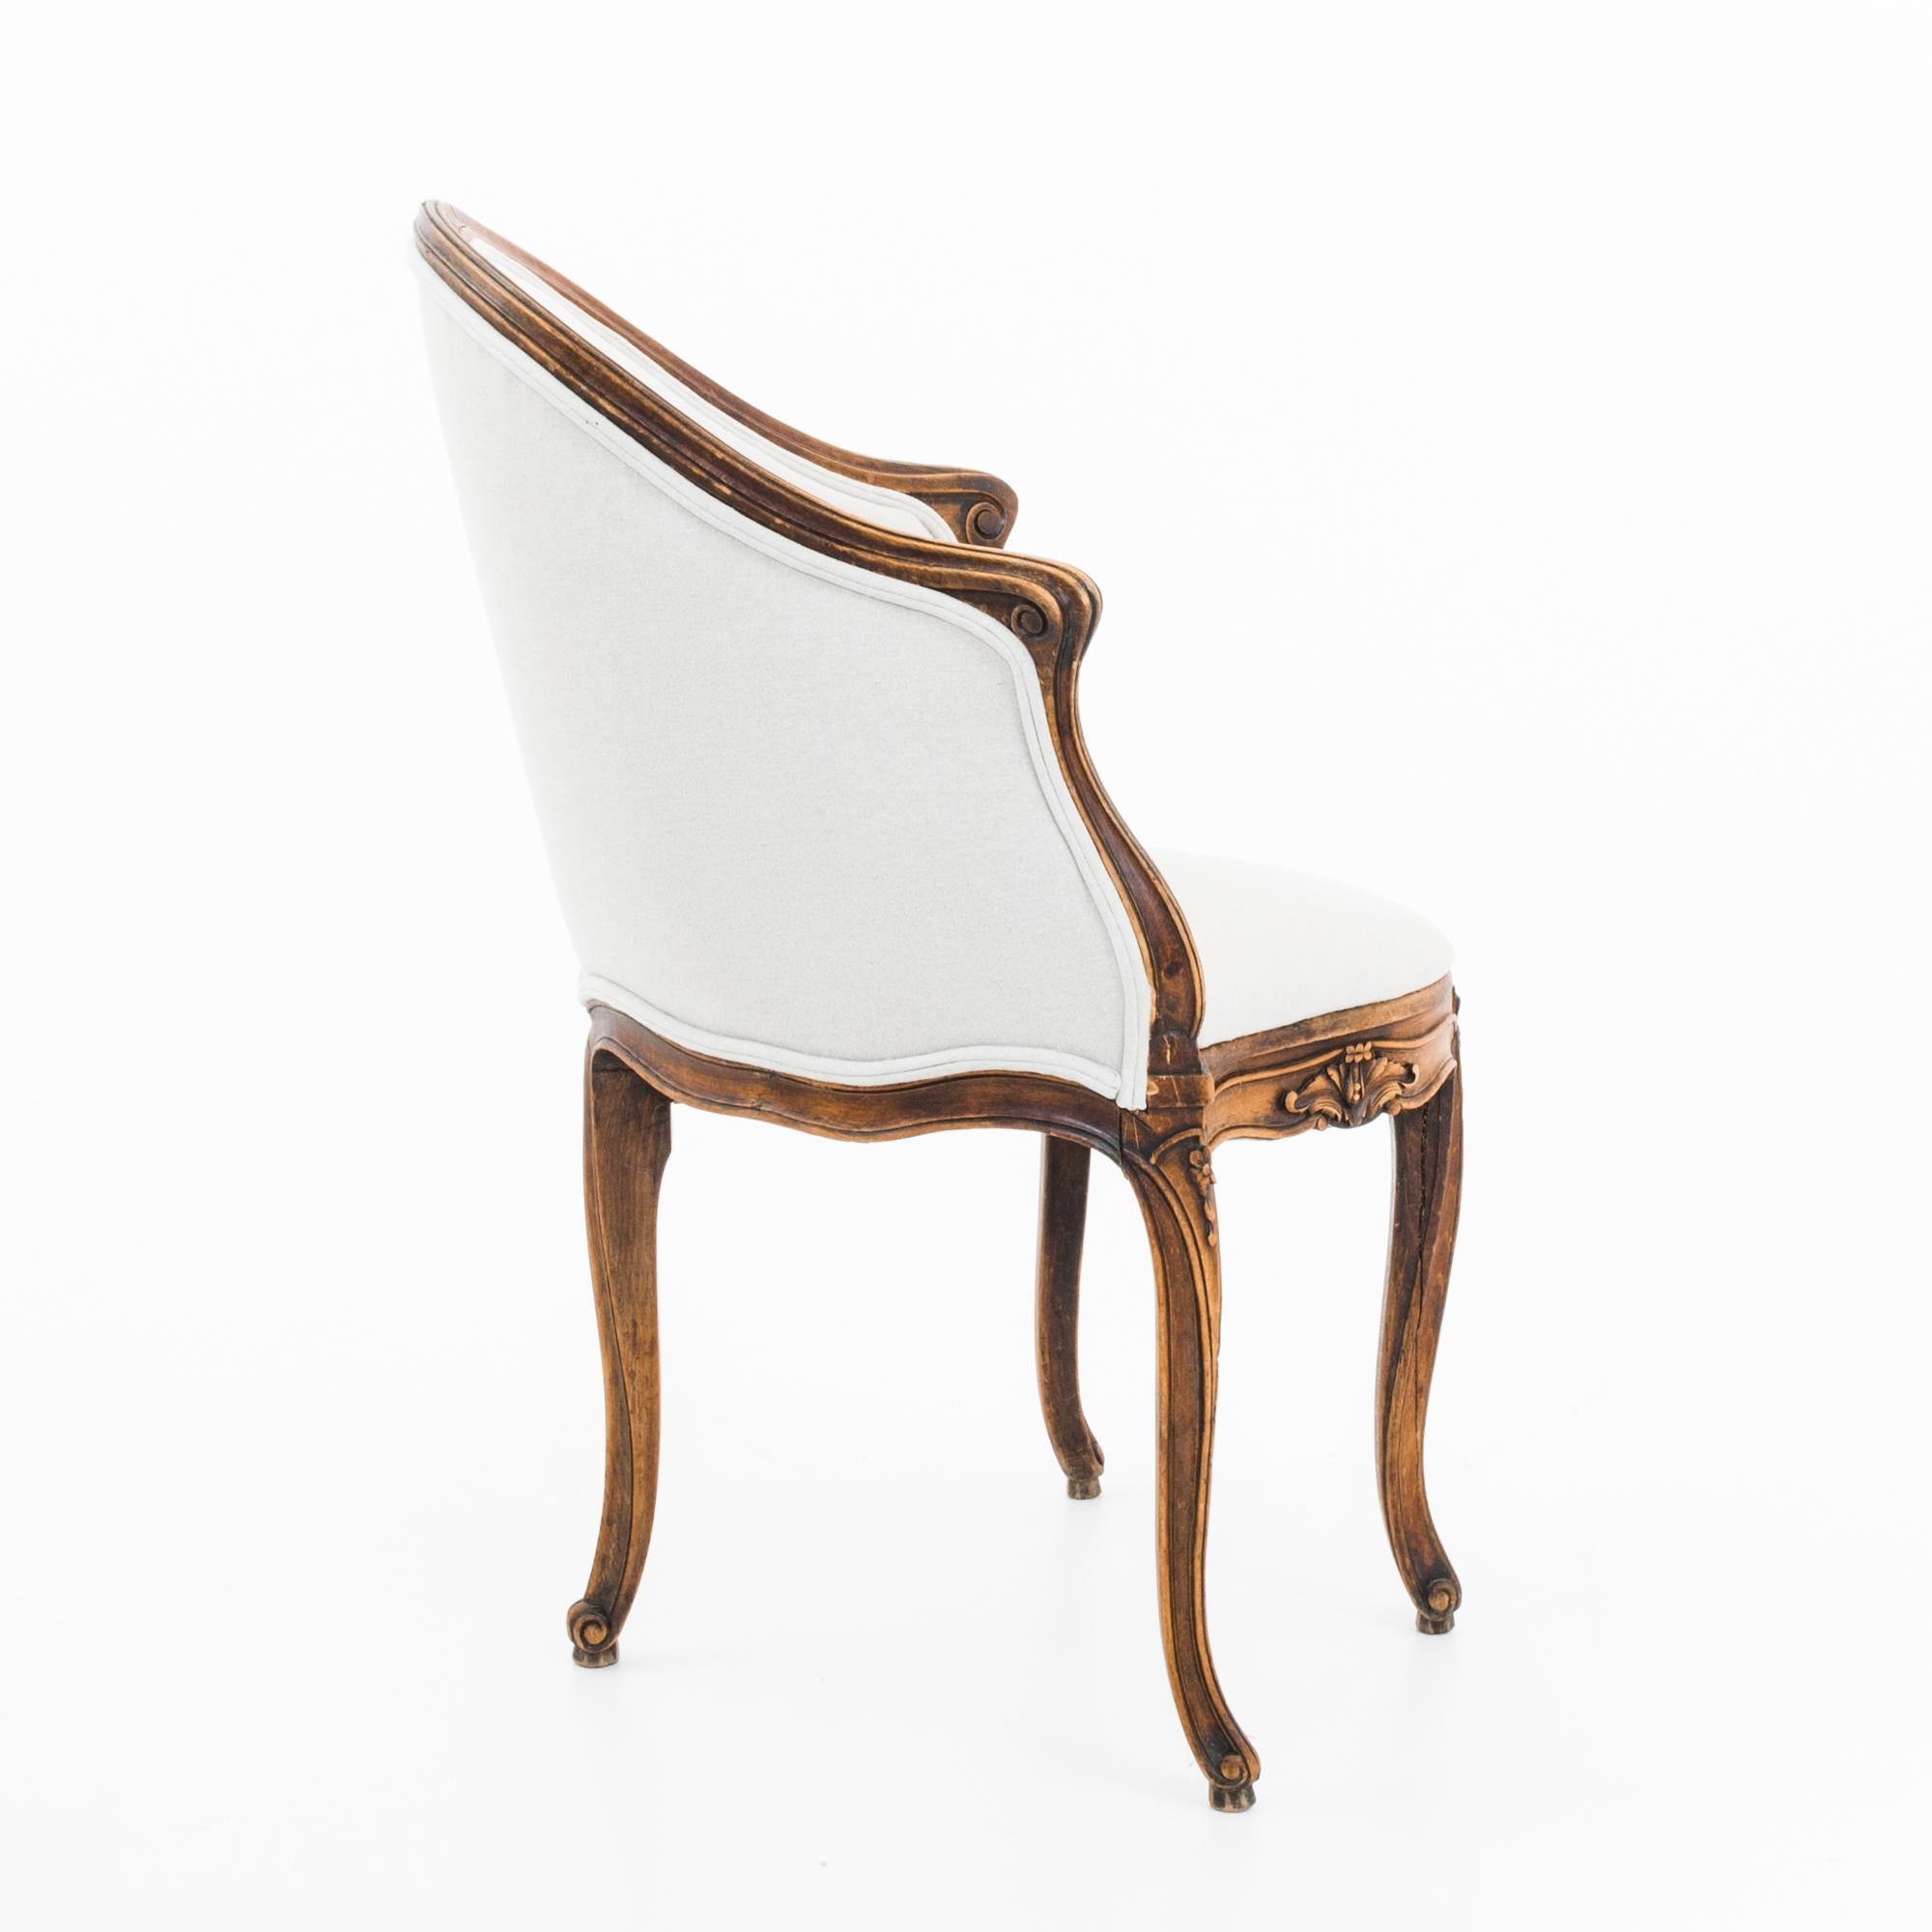 This wooden armchair with a curved backrest was made in France, circa 1860. The white upholstered seat and back accentuates the polished patina, which displays a radiant hue deepened over time. Cabriole legs and carvings of flowers and scrolls make